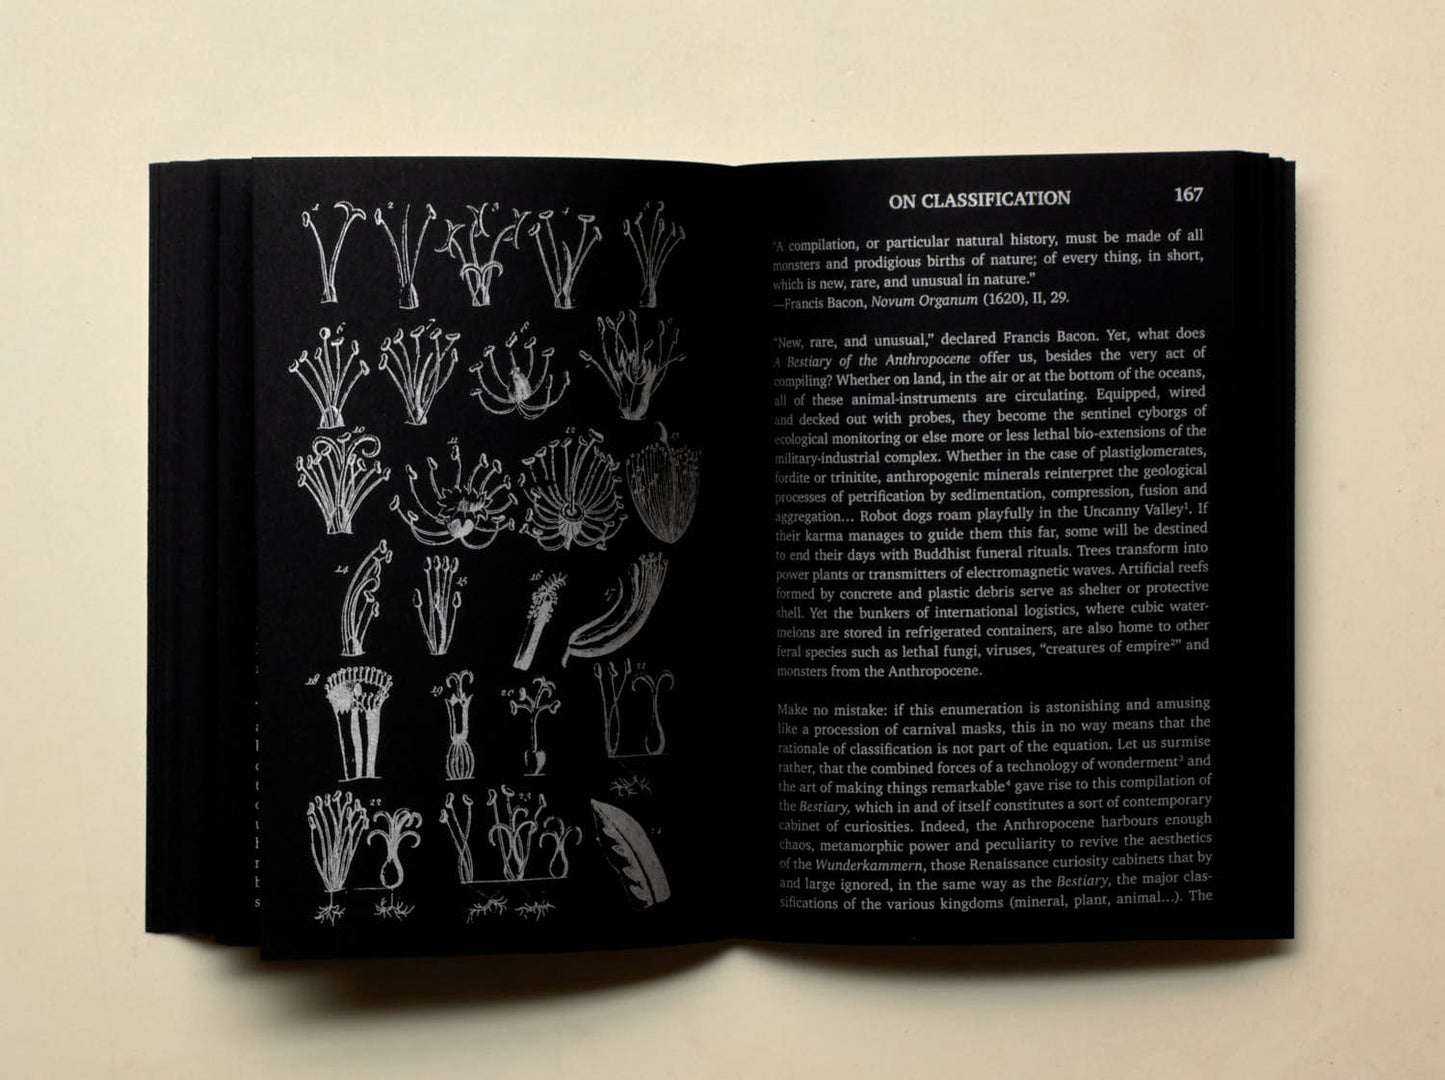 Maria Roszkowska,  A Bestiary of the Anthropocene Hybrid plants, animals, minerals, fungi, and other specimens